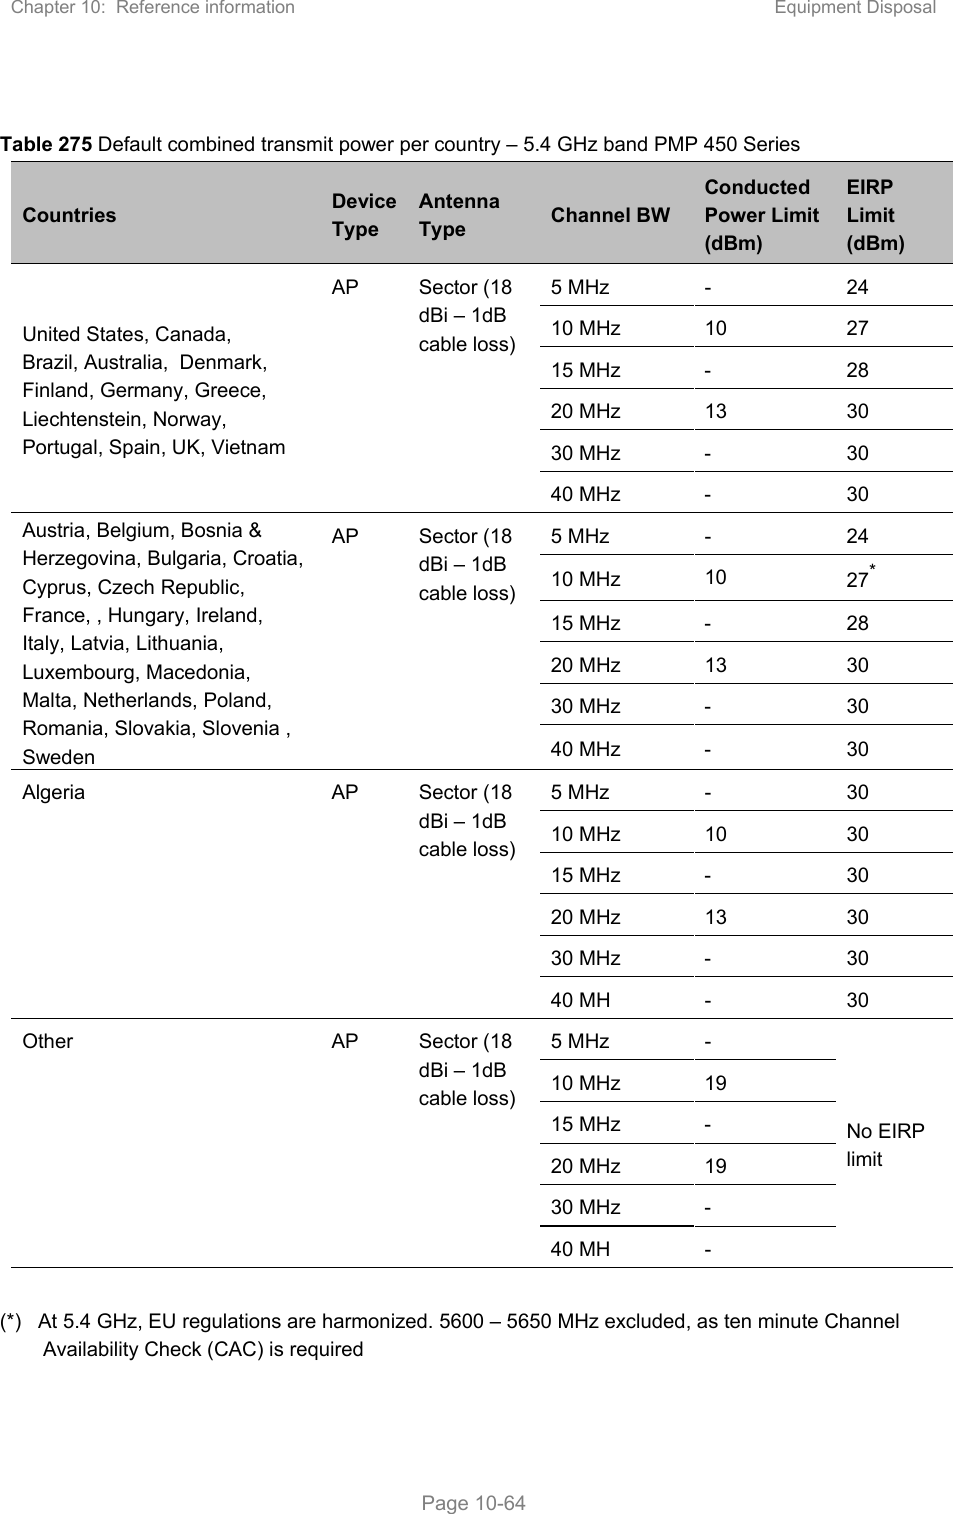 Chapter 10:  Reference information  Equipment Disposal   Page 10-64  Table 275 Default combined transmit power per country – 5.4 GHz band PMP 450 Series  Countries  Device Type Antenna Type  Channel BW Conducted Power Limit (dBm) EIRP Limit (dBm) United States, Canada, Brazil, Australia,  Denmark, Finland, Germany, Greece, Liechtenstein, Norway, Portugal, Spain, UK, Vietnam AP  Sector (18 dBi – 1dB cable loss) 5 MHz  -  24 10 MHz  10  27 15 MHz  -  28 20 MHz  13  30 30 MHz  -  30 40 MHz  -  30 Austria, Belgium, Bosnia &amp; Herzegovina, Bulgaria, Croatia, Cyprus, Czech Republic, France, , Hungary, Ireland, Italy, Latvia, Lithuania, Luxembourg, Macedonia, Malta, Netherlands, Poland, Romania, Slovakia, Slovenia , Sweden AP  Sector (18 dBi – 1dB cable loss) 5 MHz  -  24 10 MHz  10  27* 15 MHz  -  28 20 MHz  13  30 30 MHz  -  30 40 MHz  -  30 Algeria  AP  Sector (18 dBi – 1dB cable loss) 5 MHz  -  30 10 MHz  10  30 15 MHz  -  30 20 MHz  13  30 30 MHz  -  30 40 MH  -  30 Other  AP  Sector (18 dBi – 1dB cable loss) 5 MHz  - No EIRP limit 10 MHz  19 15 MHz  - 20 MHz  19 30 MHz  - 40 MH  -  (*)   At 5.4 GHz, EU regulations are harmonized. 5600 – 5650 MHz excluded, as ten minute Channel Availability Check (CAC) is required   